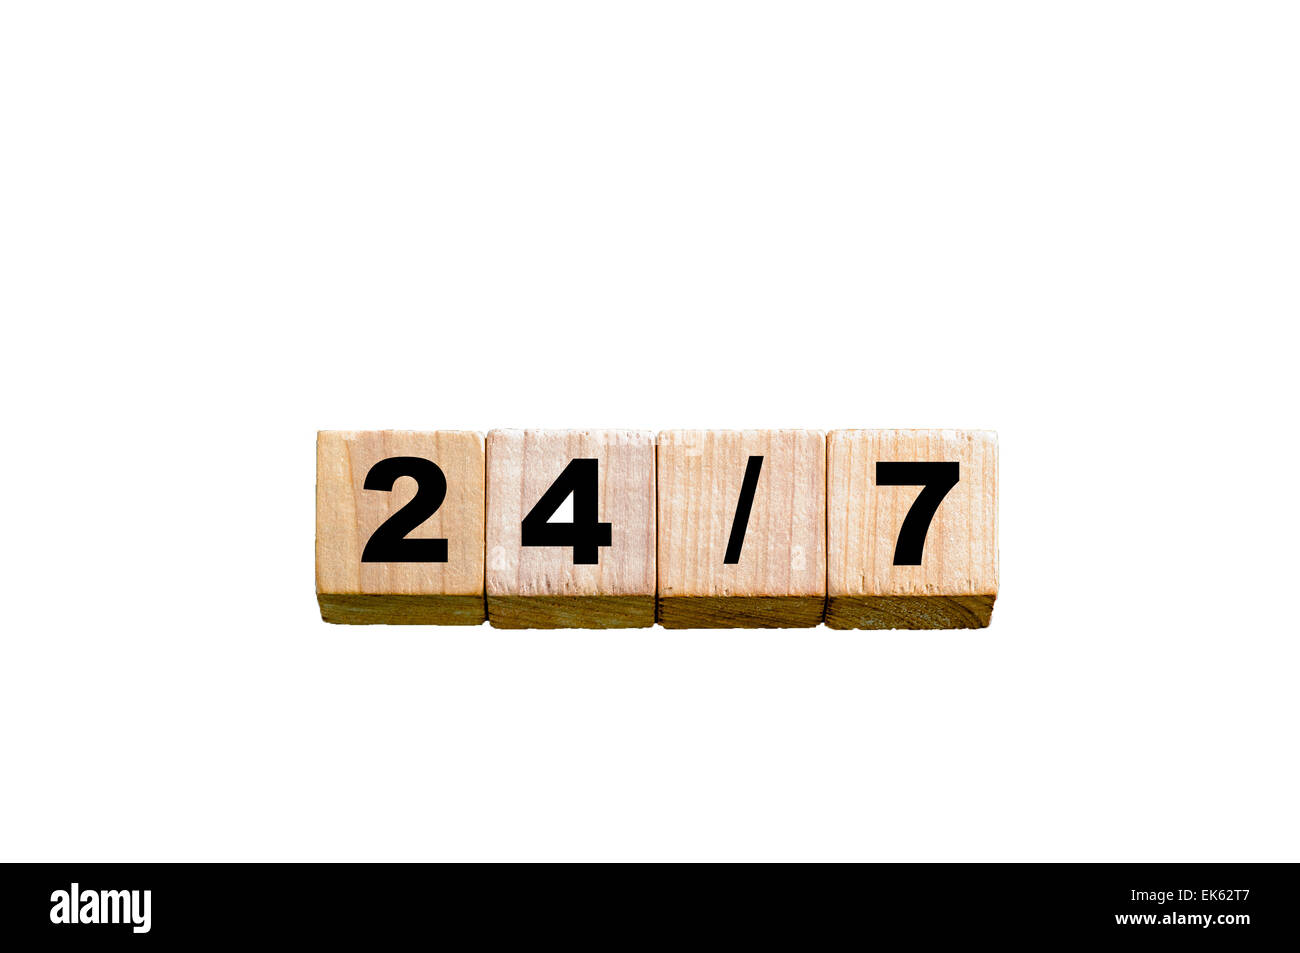 Numbers 24/7. Wooden small cubes with letters isolated on white background with available copy space.Concept image. Stock Photo